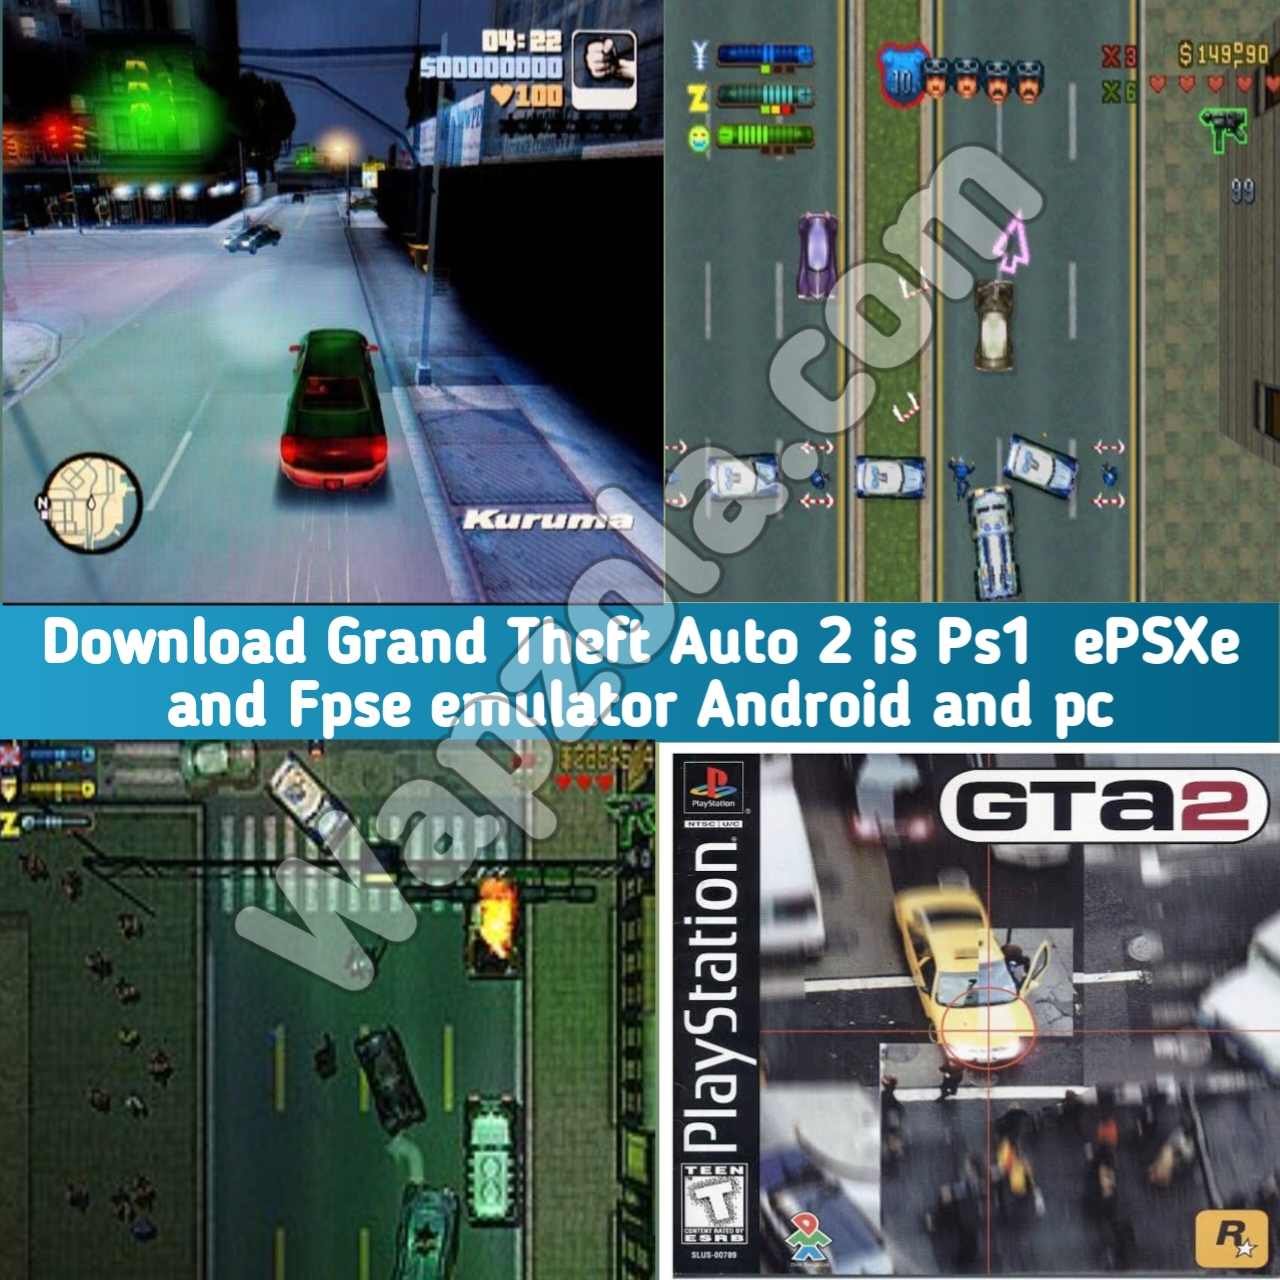 Read more about the article [Download] Grand Theft Auto 2 ROM (ISO) ePSXe and Fpse emulator (355MB size) highly compressed – Sony Playstation / PSX / PS1 APK BIN/CUE play on Android and pc